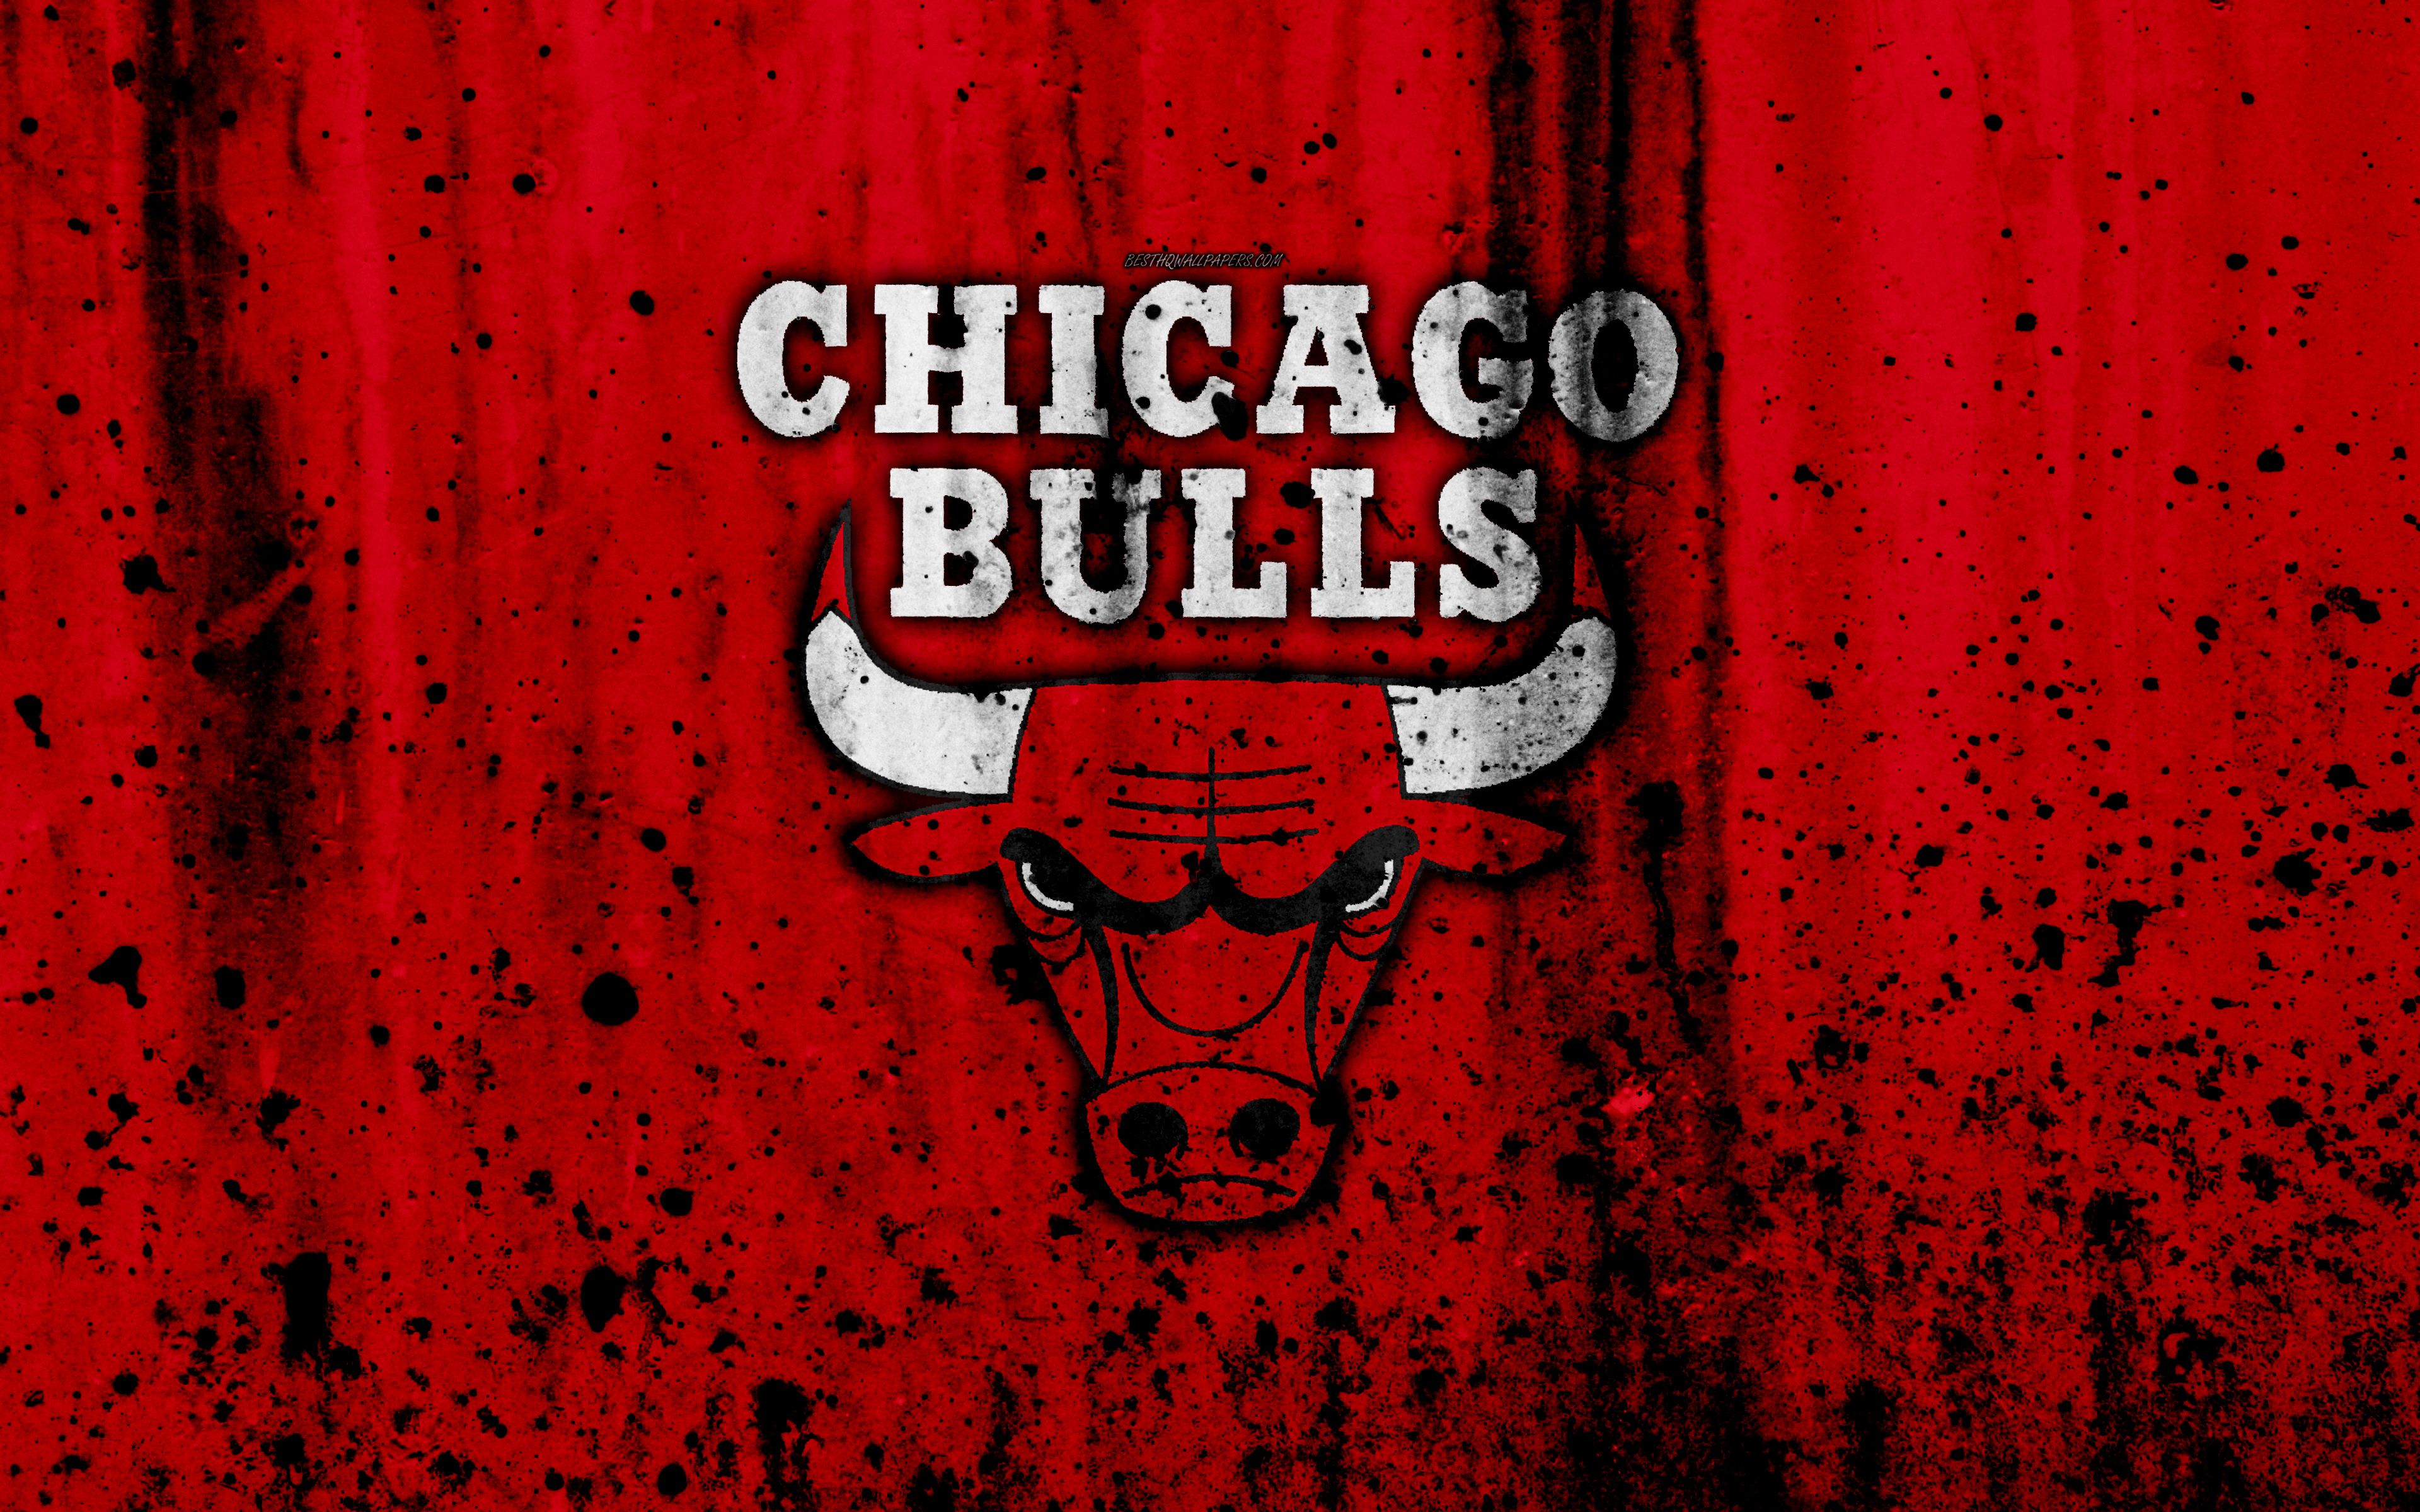 Download wallpaper Chicago Bulls, 4k, grunge, NBA, basketball club, Eastern Conference, USA, emblem, stone texture, basketball, Central Division for desktop with resolution 3840x2400. High Quality HD picture wallpaper